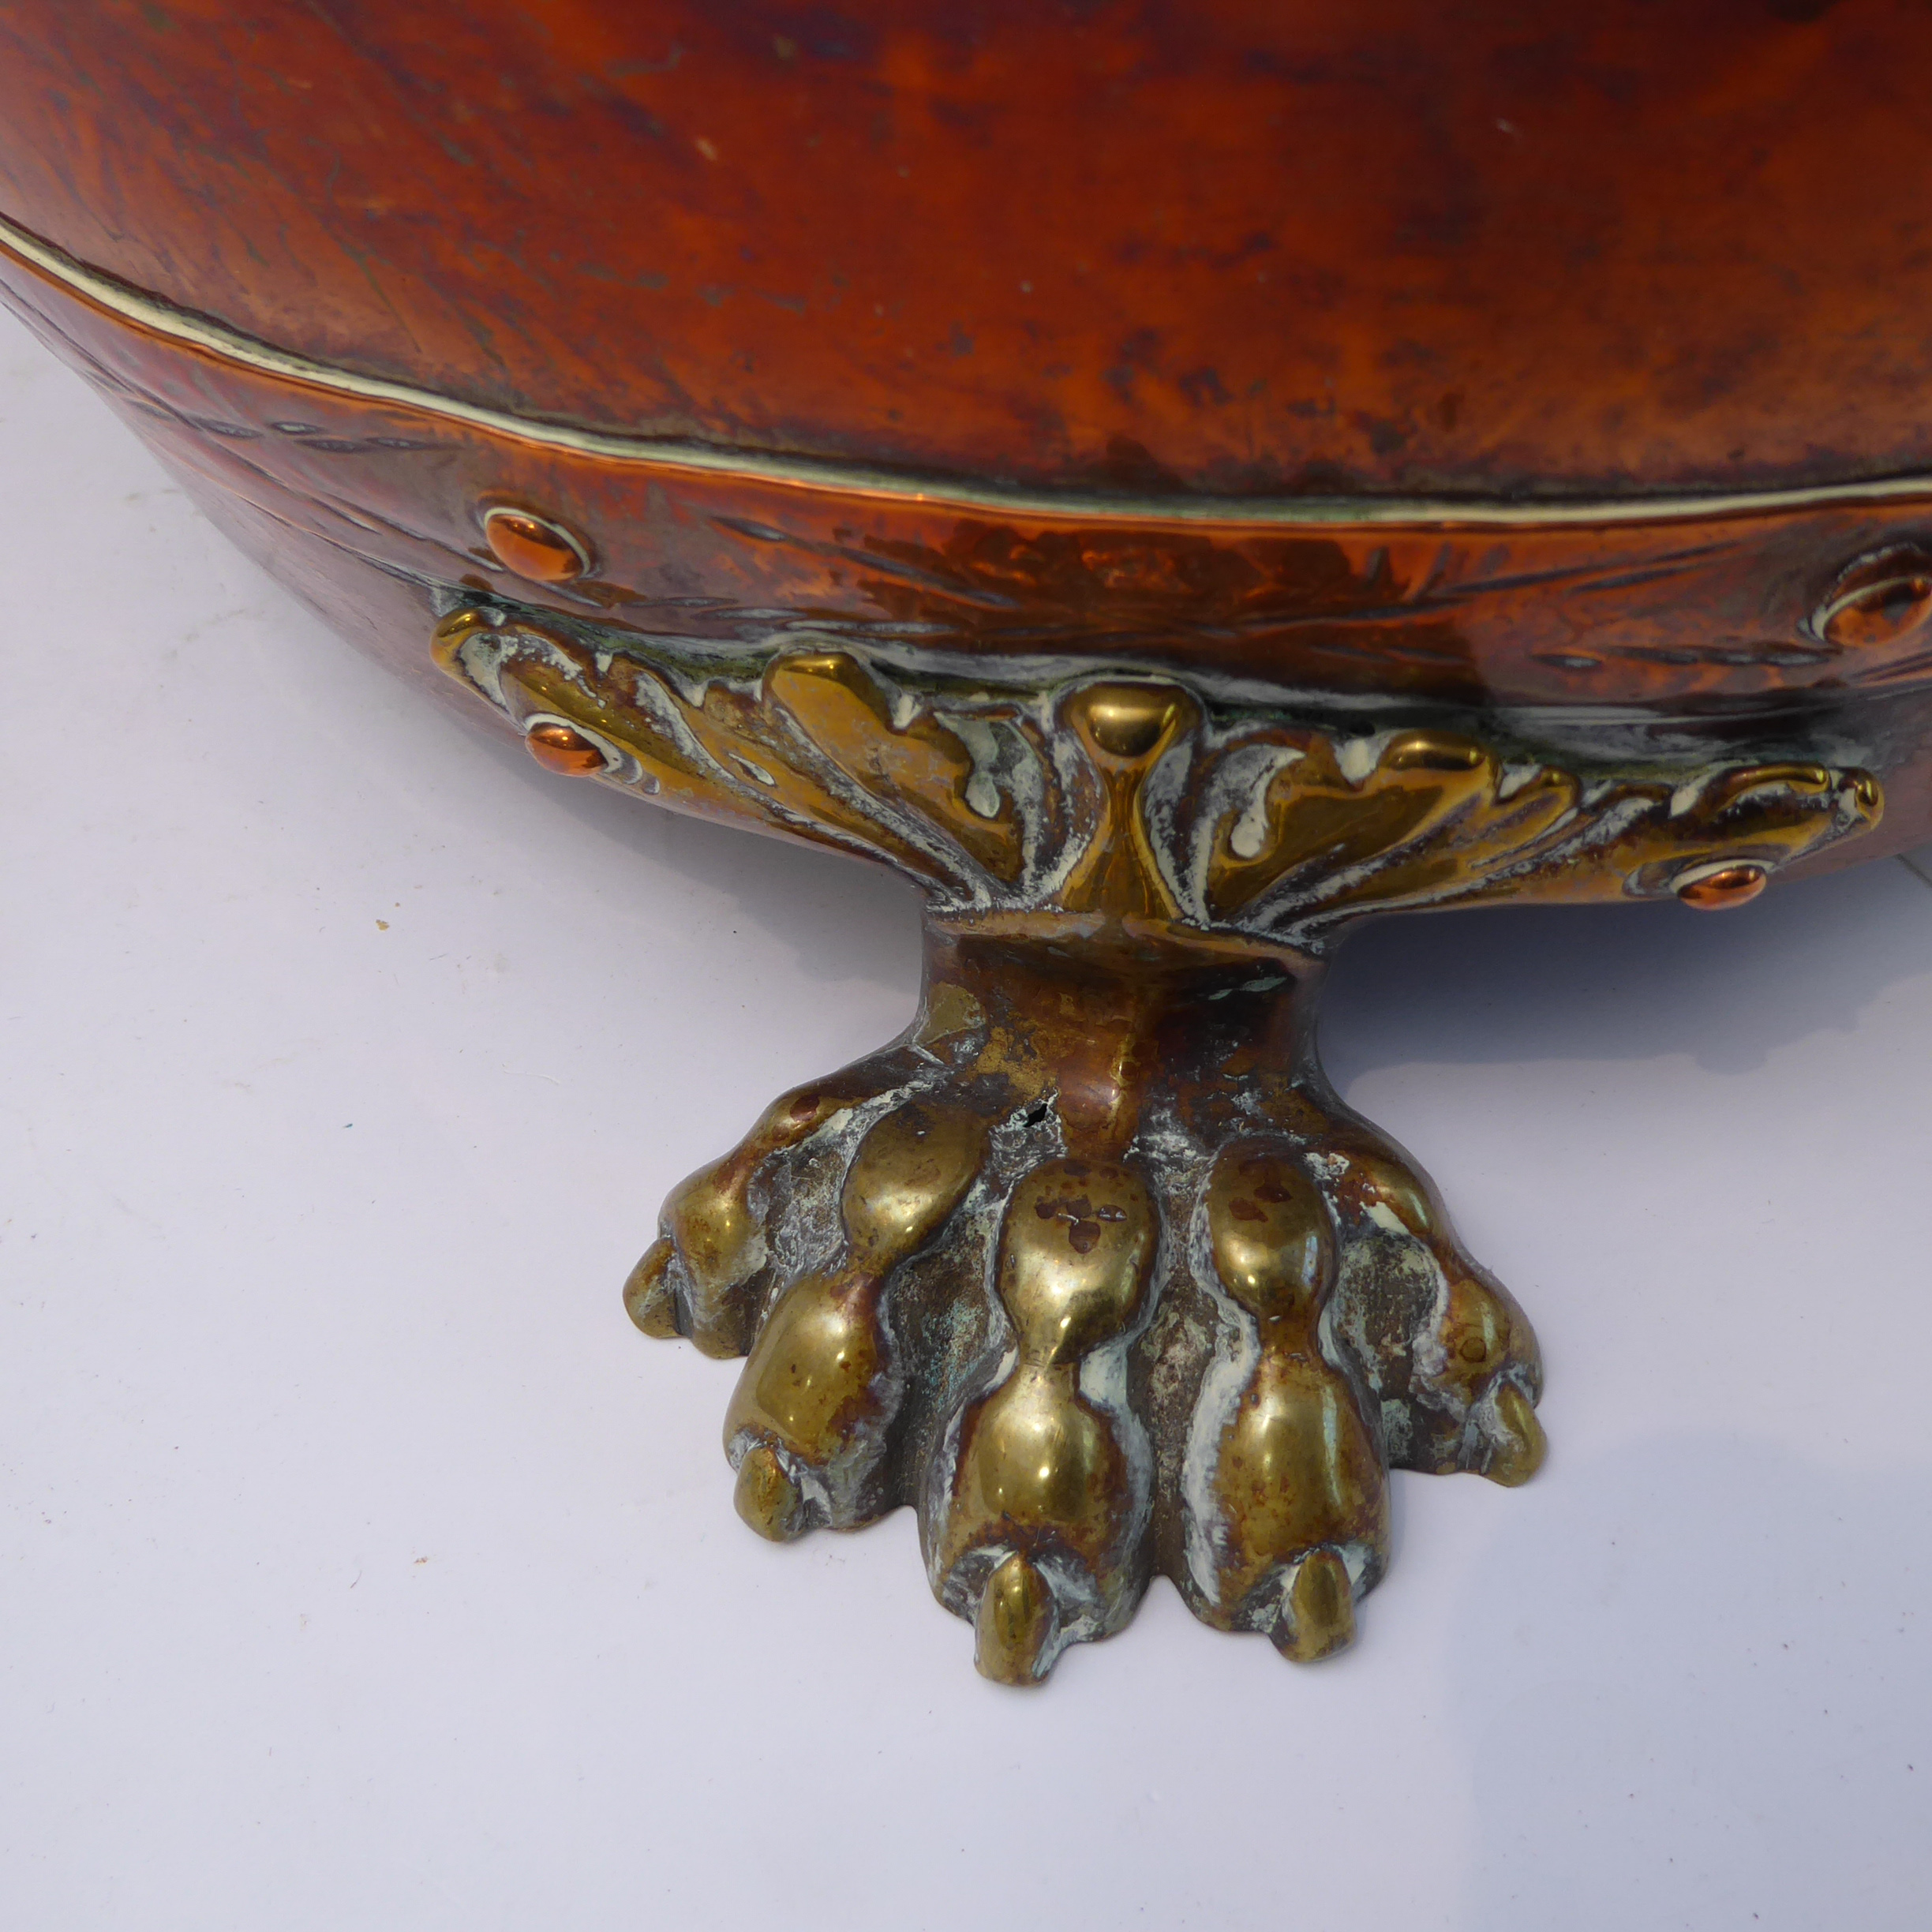 A 19th century circular copper log-bin with brass loop-handles and riveted copper borders, raised on - Image 3 of 5